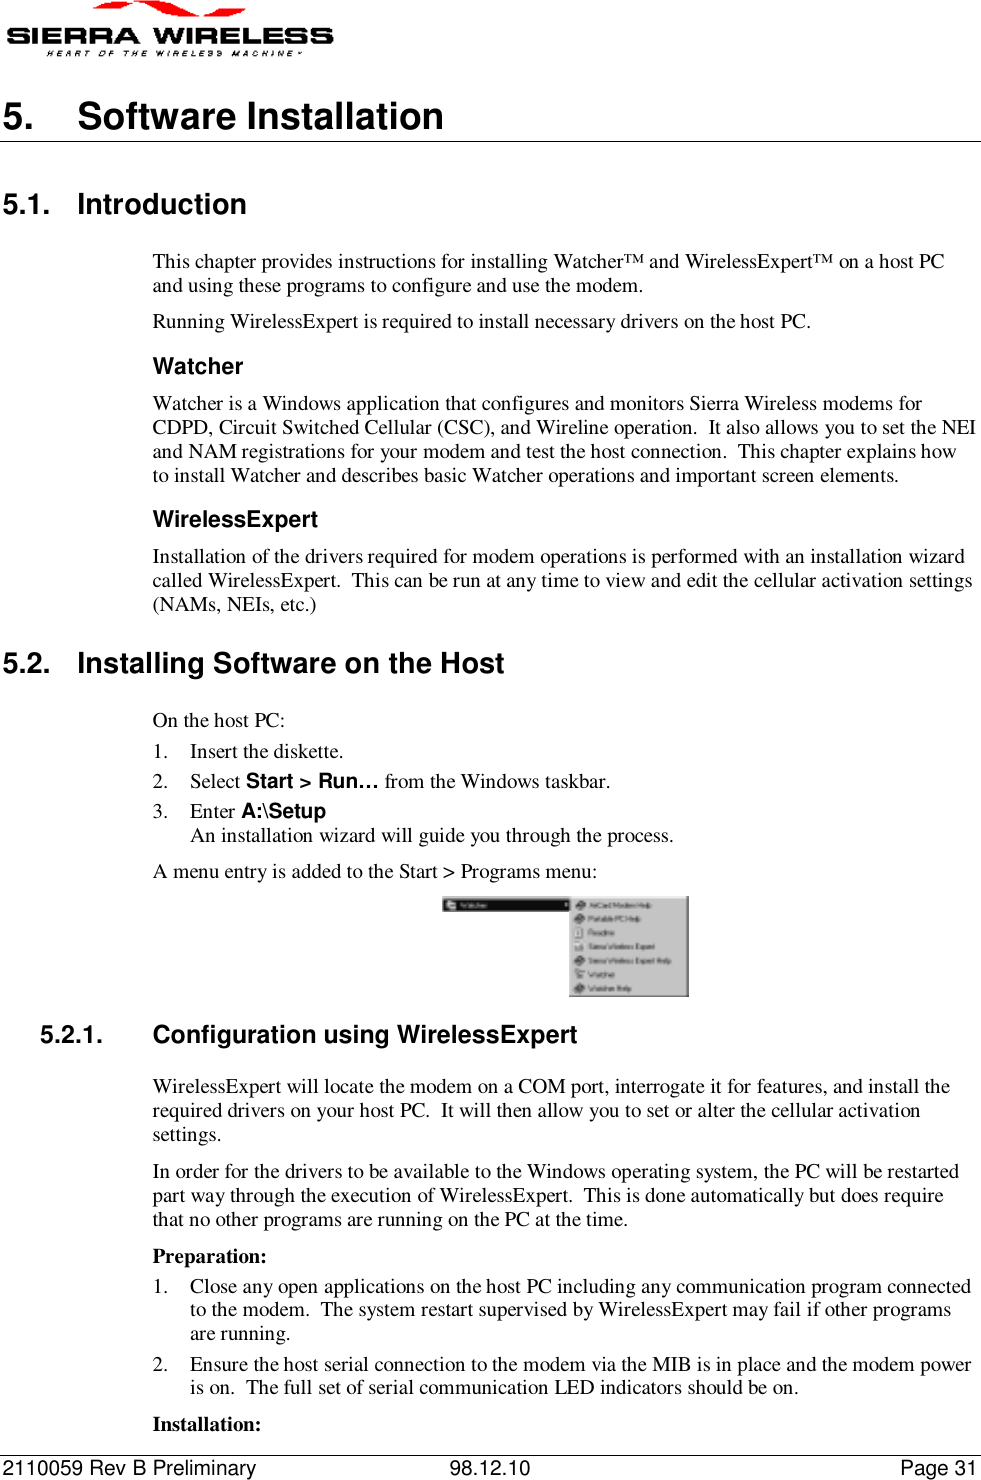 2110059 Rev B Preliminary 98.12.10 Page 315.  Software Installation5.1. IntroductionThis chapter provides instructions for installing Watcher™ and WirelessExpert™ on a host PCand using these programs to configure and use the modem.Running WirelessExpert is required to install necessary drivers on the host PC.WatcherWatcher is a Windows application that configures and monitors Sierra Wireless modems forCDPD, Circuit Switched Cellular (CSC), and Wireline operation.  It also allows you to set the NEIand NAM registrations for your modem and test the host connection.  This chapter explains howto install Watcher and describes basic Watcher operations and important screen elements.WirelessExpertInstallation of the drivers required for modem operations is performed with an installation wizardcalled WirelessExpert.  This can be run at any time to view and edit the cellular activation settings(NAMs, NEIs, etc.)5.2.  Installing Software on the HostOn the host PC:1. Insert the diskette.2. Select Start &gt; Run… from the Windows taskbar.3. Enter A:\SetupAn installation wizard will guide you through the process.A menu entry is added to the Start &gt; Programs menu:5.2.1.  Configuration using WirelessExpertWirelessExpert will locate the modem on a COM port, interrogate it for features, and install therequired drivers on your host PC.  It will then allow you to set or alter the cellular activationsettings.In order for the drivers to be available to the Windows operating system, the PC will be restartedpart way through the execution of WirelessExpert.  This is done automatically but does requirethat no other programs are running on the PC at the time.Preparation:1. Close any open applications on the host PC including any communication program connectedto the modem.  The system restart supervised by WirelessExpert may fail if other programsare running.2. Ensure the host serial connection to the modem via the MIB is in place and the modem poweris on.  The full set of serial communication LED indicators should be on.Installation: